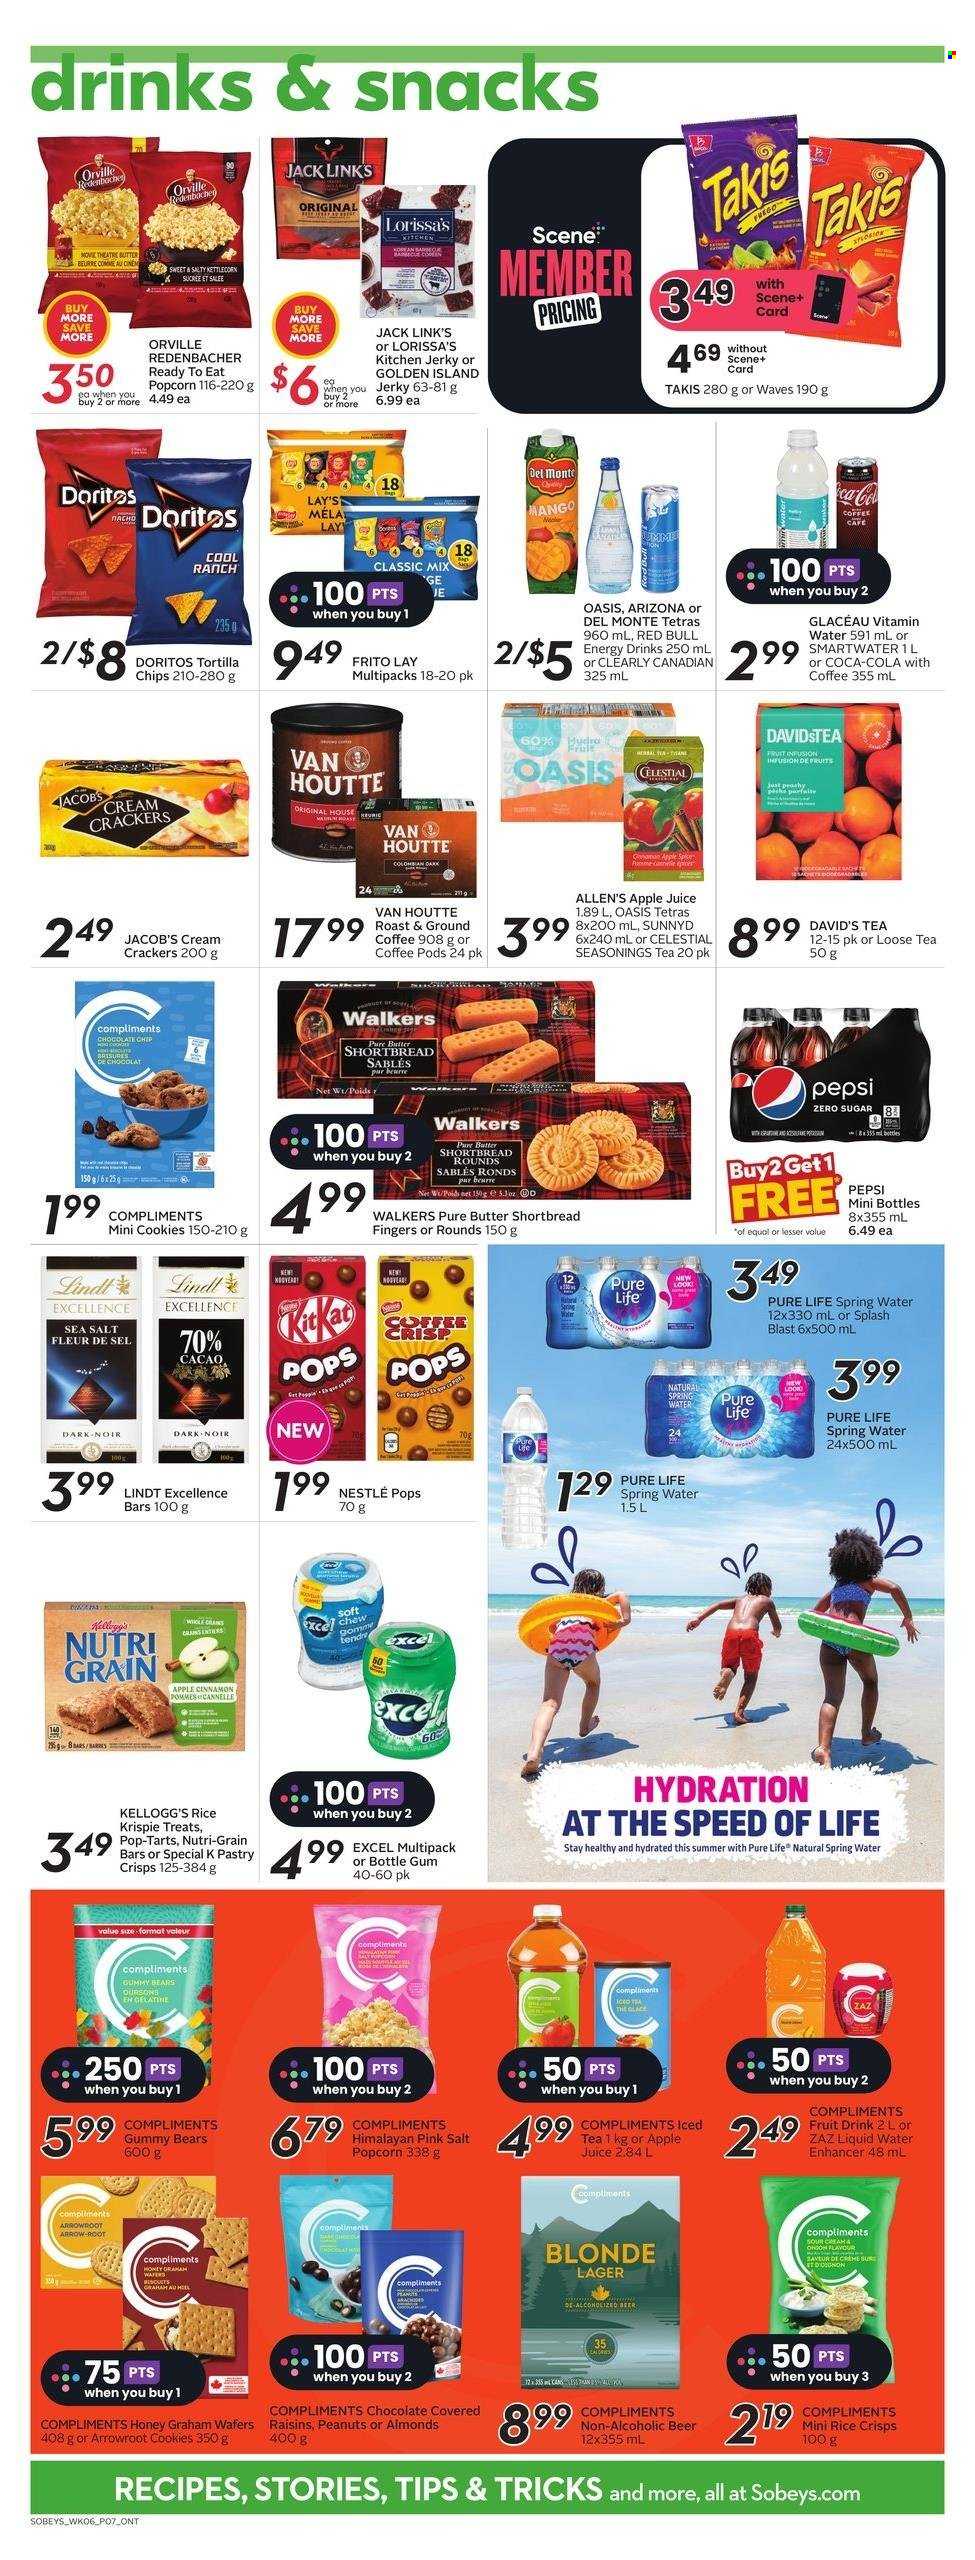 thumbnail - Sobeys Flyer - June 08, 2023 - June 14, 2023 - Sales products - tart, jerky, sour cream, cookies, wafers, chocolate, chocolate chips, cereal bar, crackers, Kellogg's, biscuit, Pop-Tarts, Nutri-Grain bars, Doritos, tortilla chips, chips, Lay’s, popcorn, rice crisps, Jack Link's, salty snack, Del Monte, Nutri-Grain, spice, cinnamon, honey, syrup, almonds, raisins, peanuts, dried fruit, apple juice, Coca-Cola, Pepsi, juice, energy drink, fruit drink, ice tea, soft drink, Red Bull, AriZona, spring water, Smartwater, vitamin water, coffee pods, ground coffee, L'Or, alcohol, beer, Lager, non-alcoholic beer, mouse, electrolyte drink, Nestlé, Chanel, Lindt. Page 10.